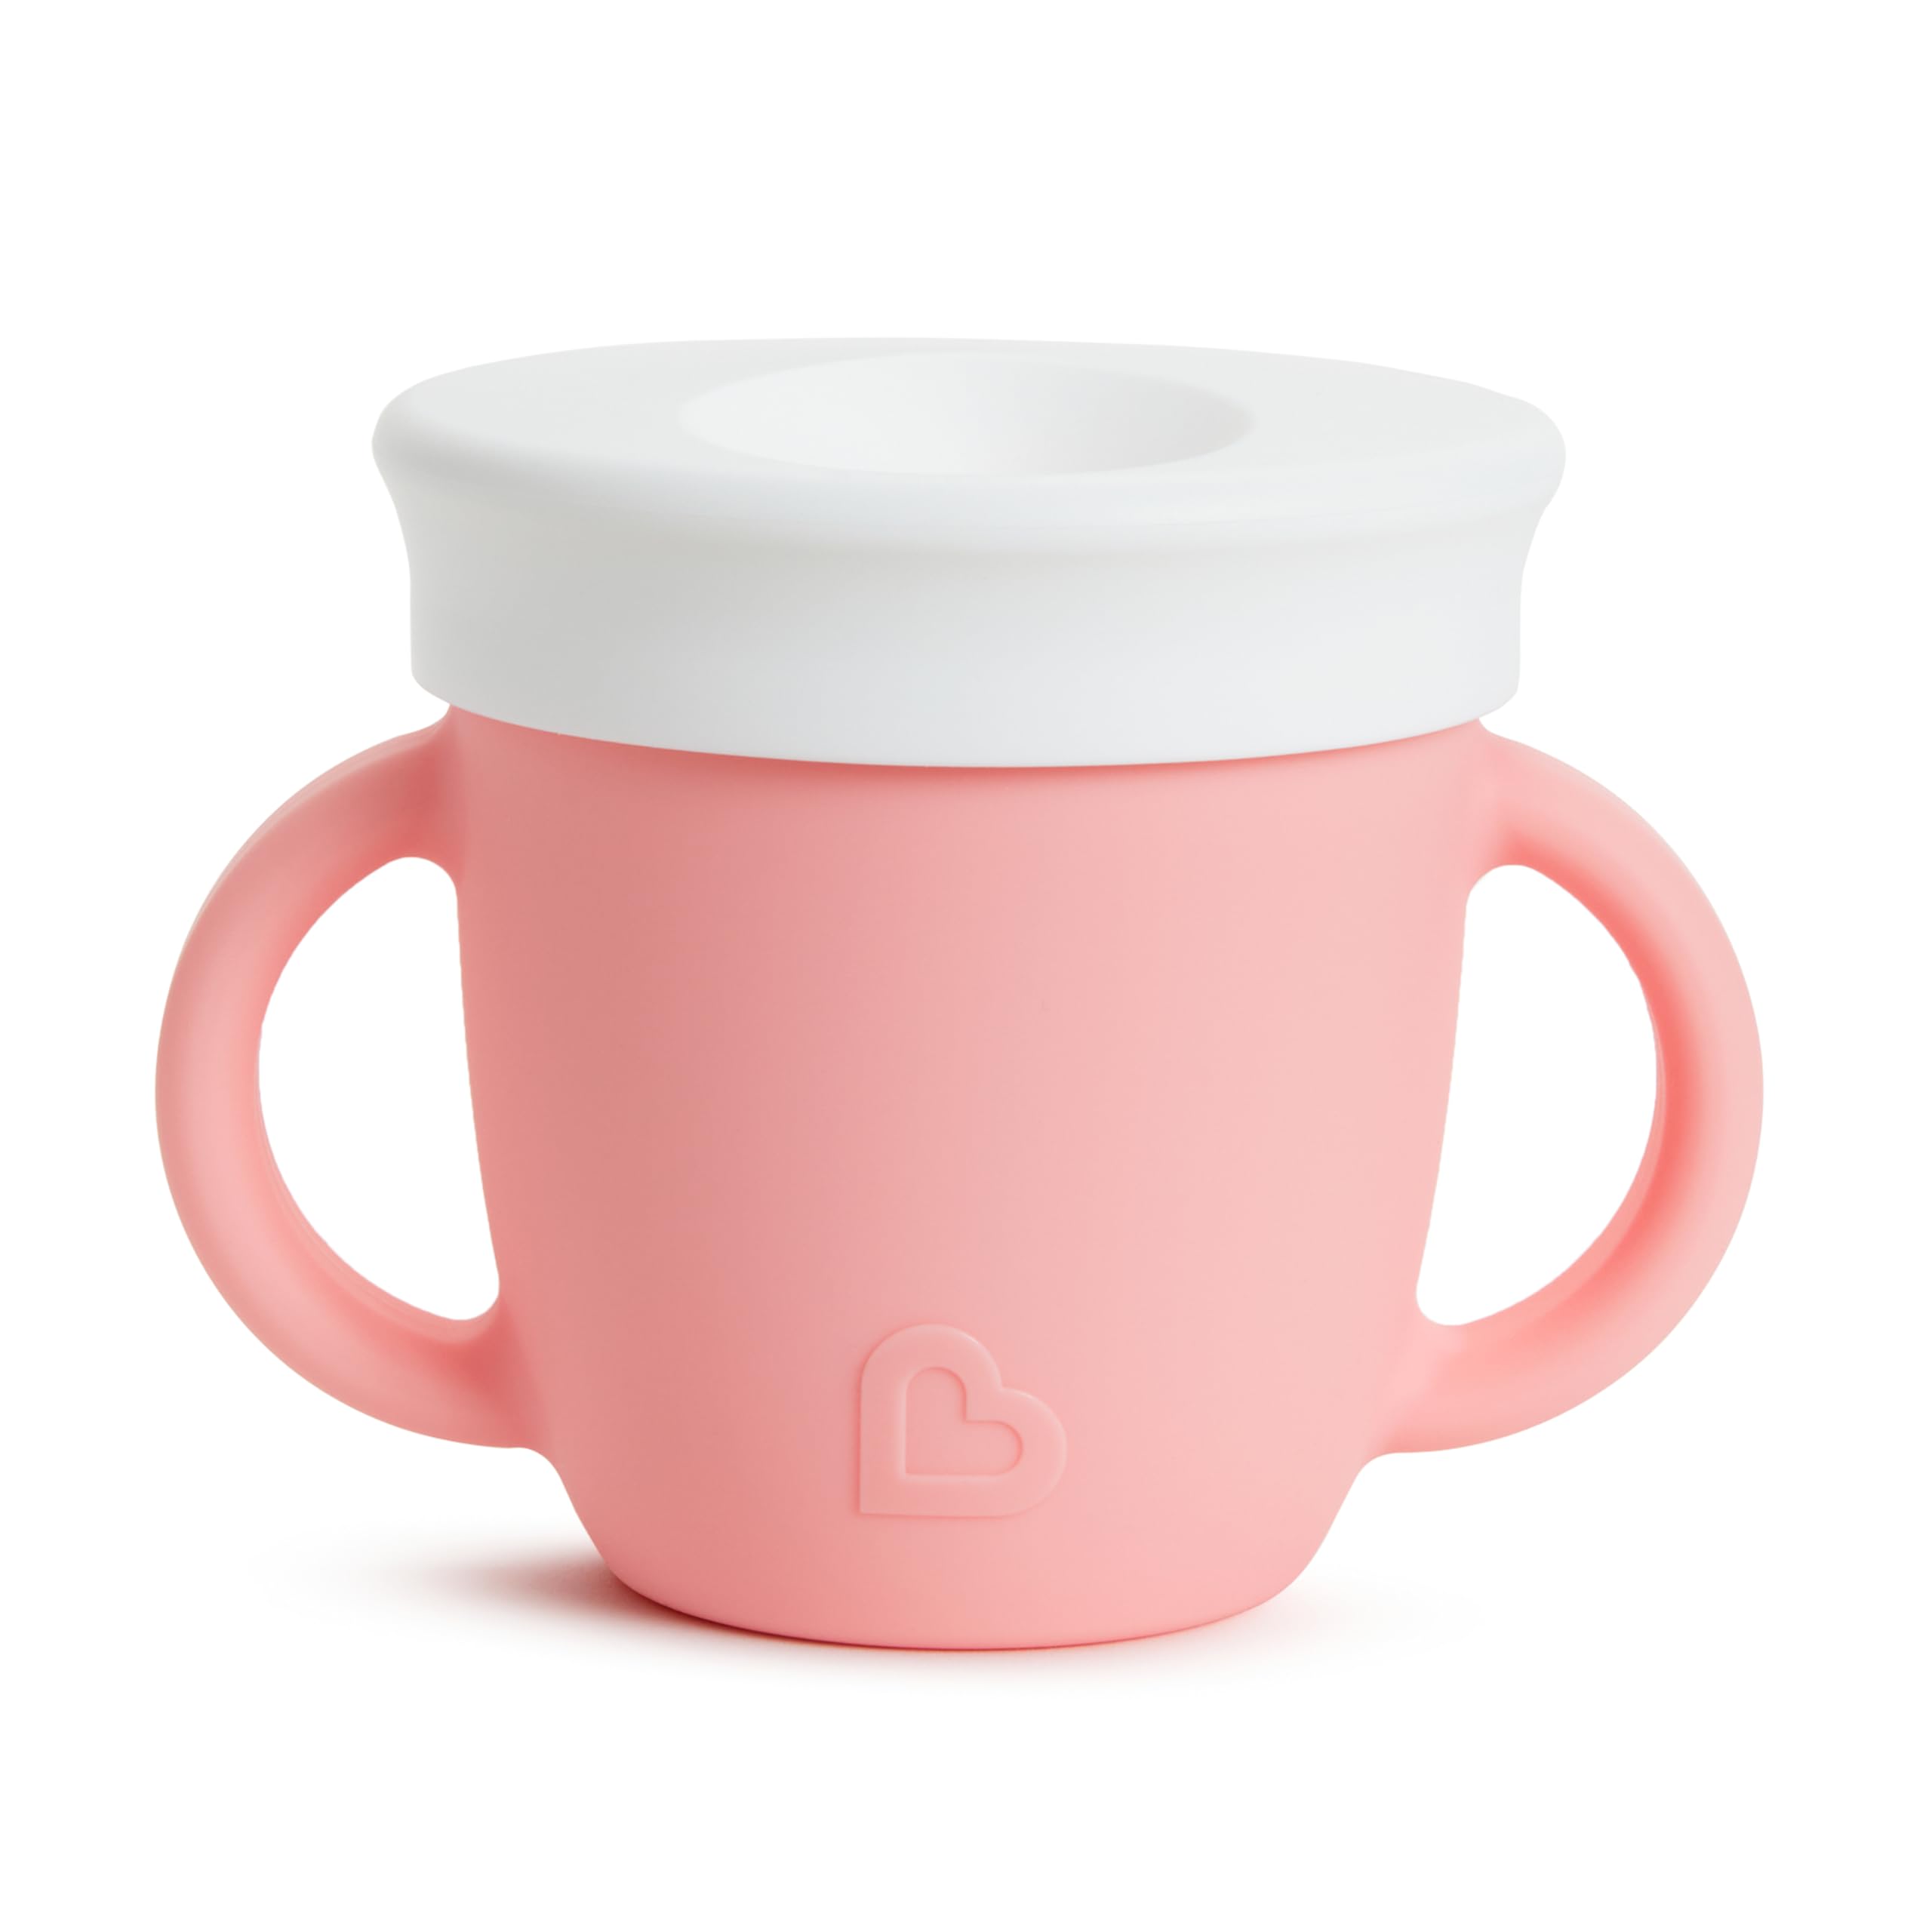 Munchkin® C’est Silicone!™ Training Sippy Cup with Handles and Lid for Babies and Toddlers, 6 oz, Coral